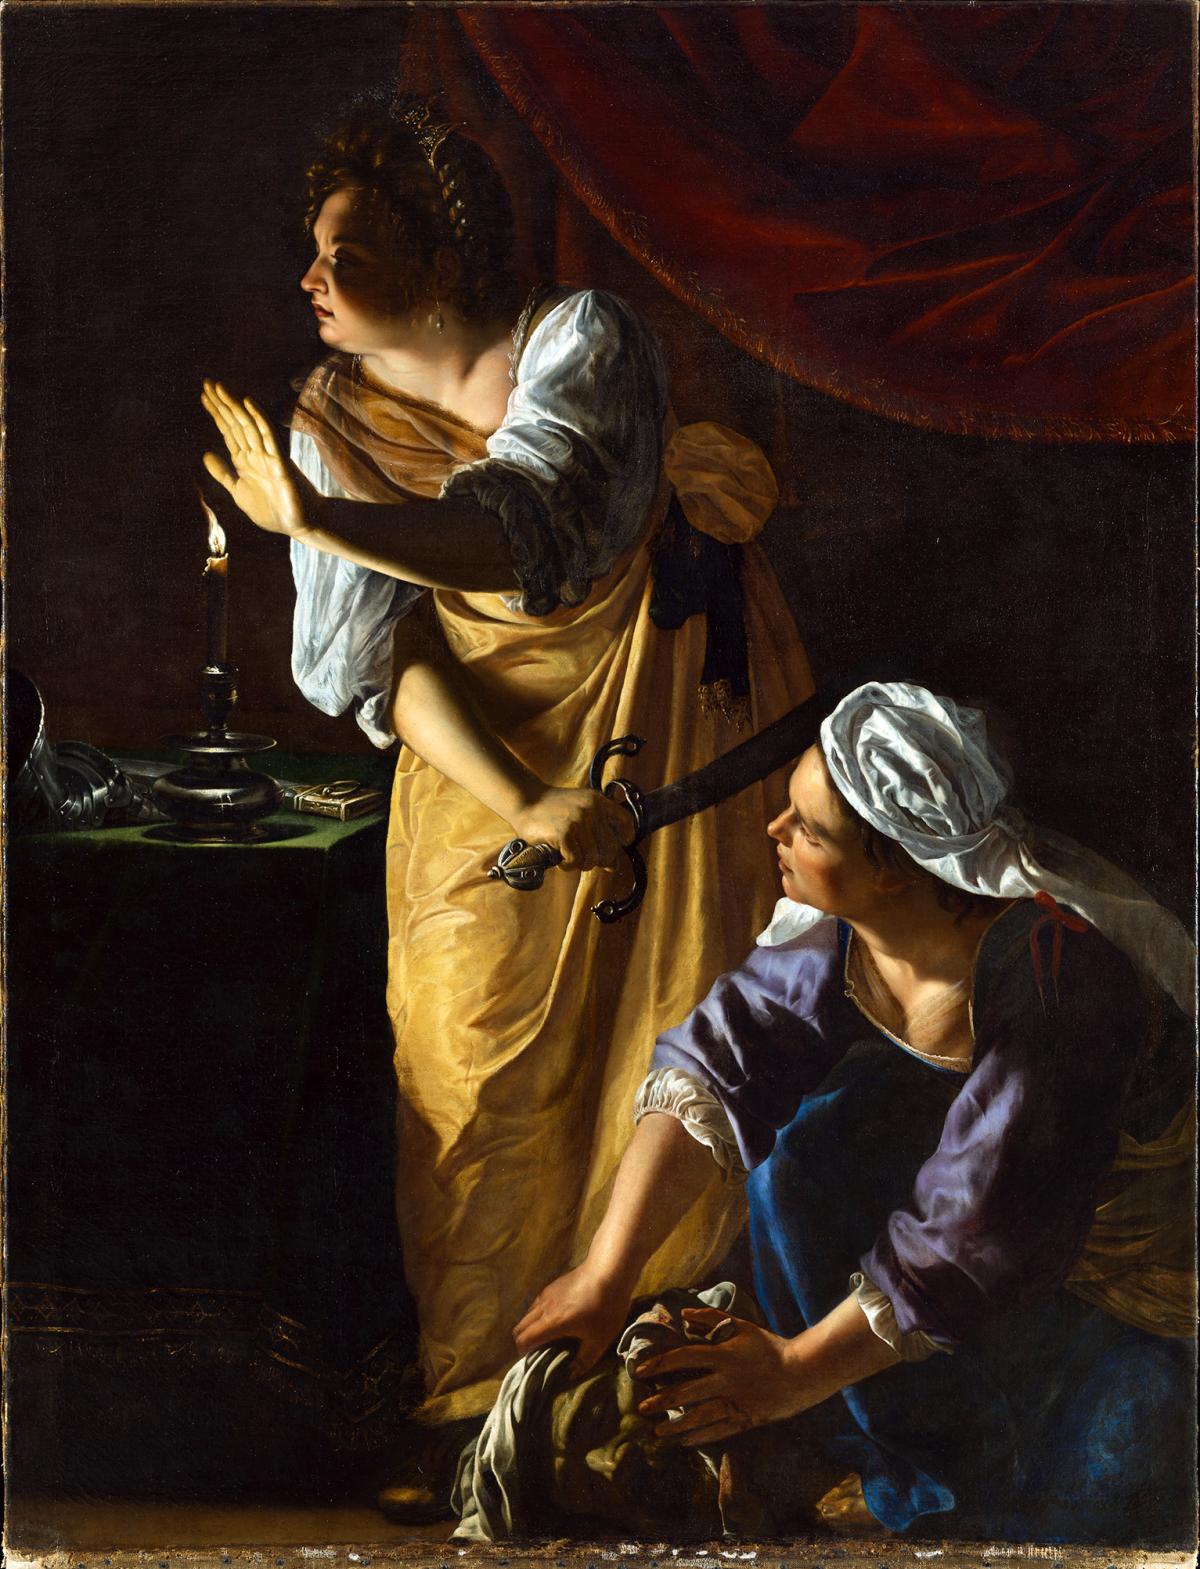 Judith and her maid clearing away the evidence of murder